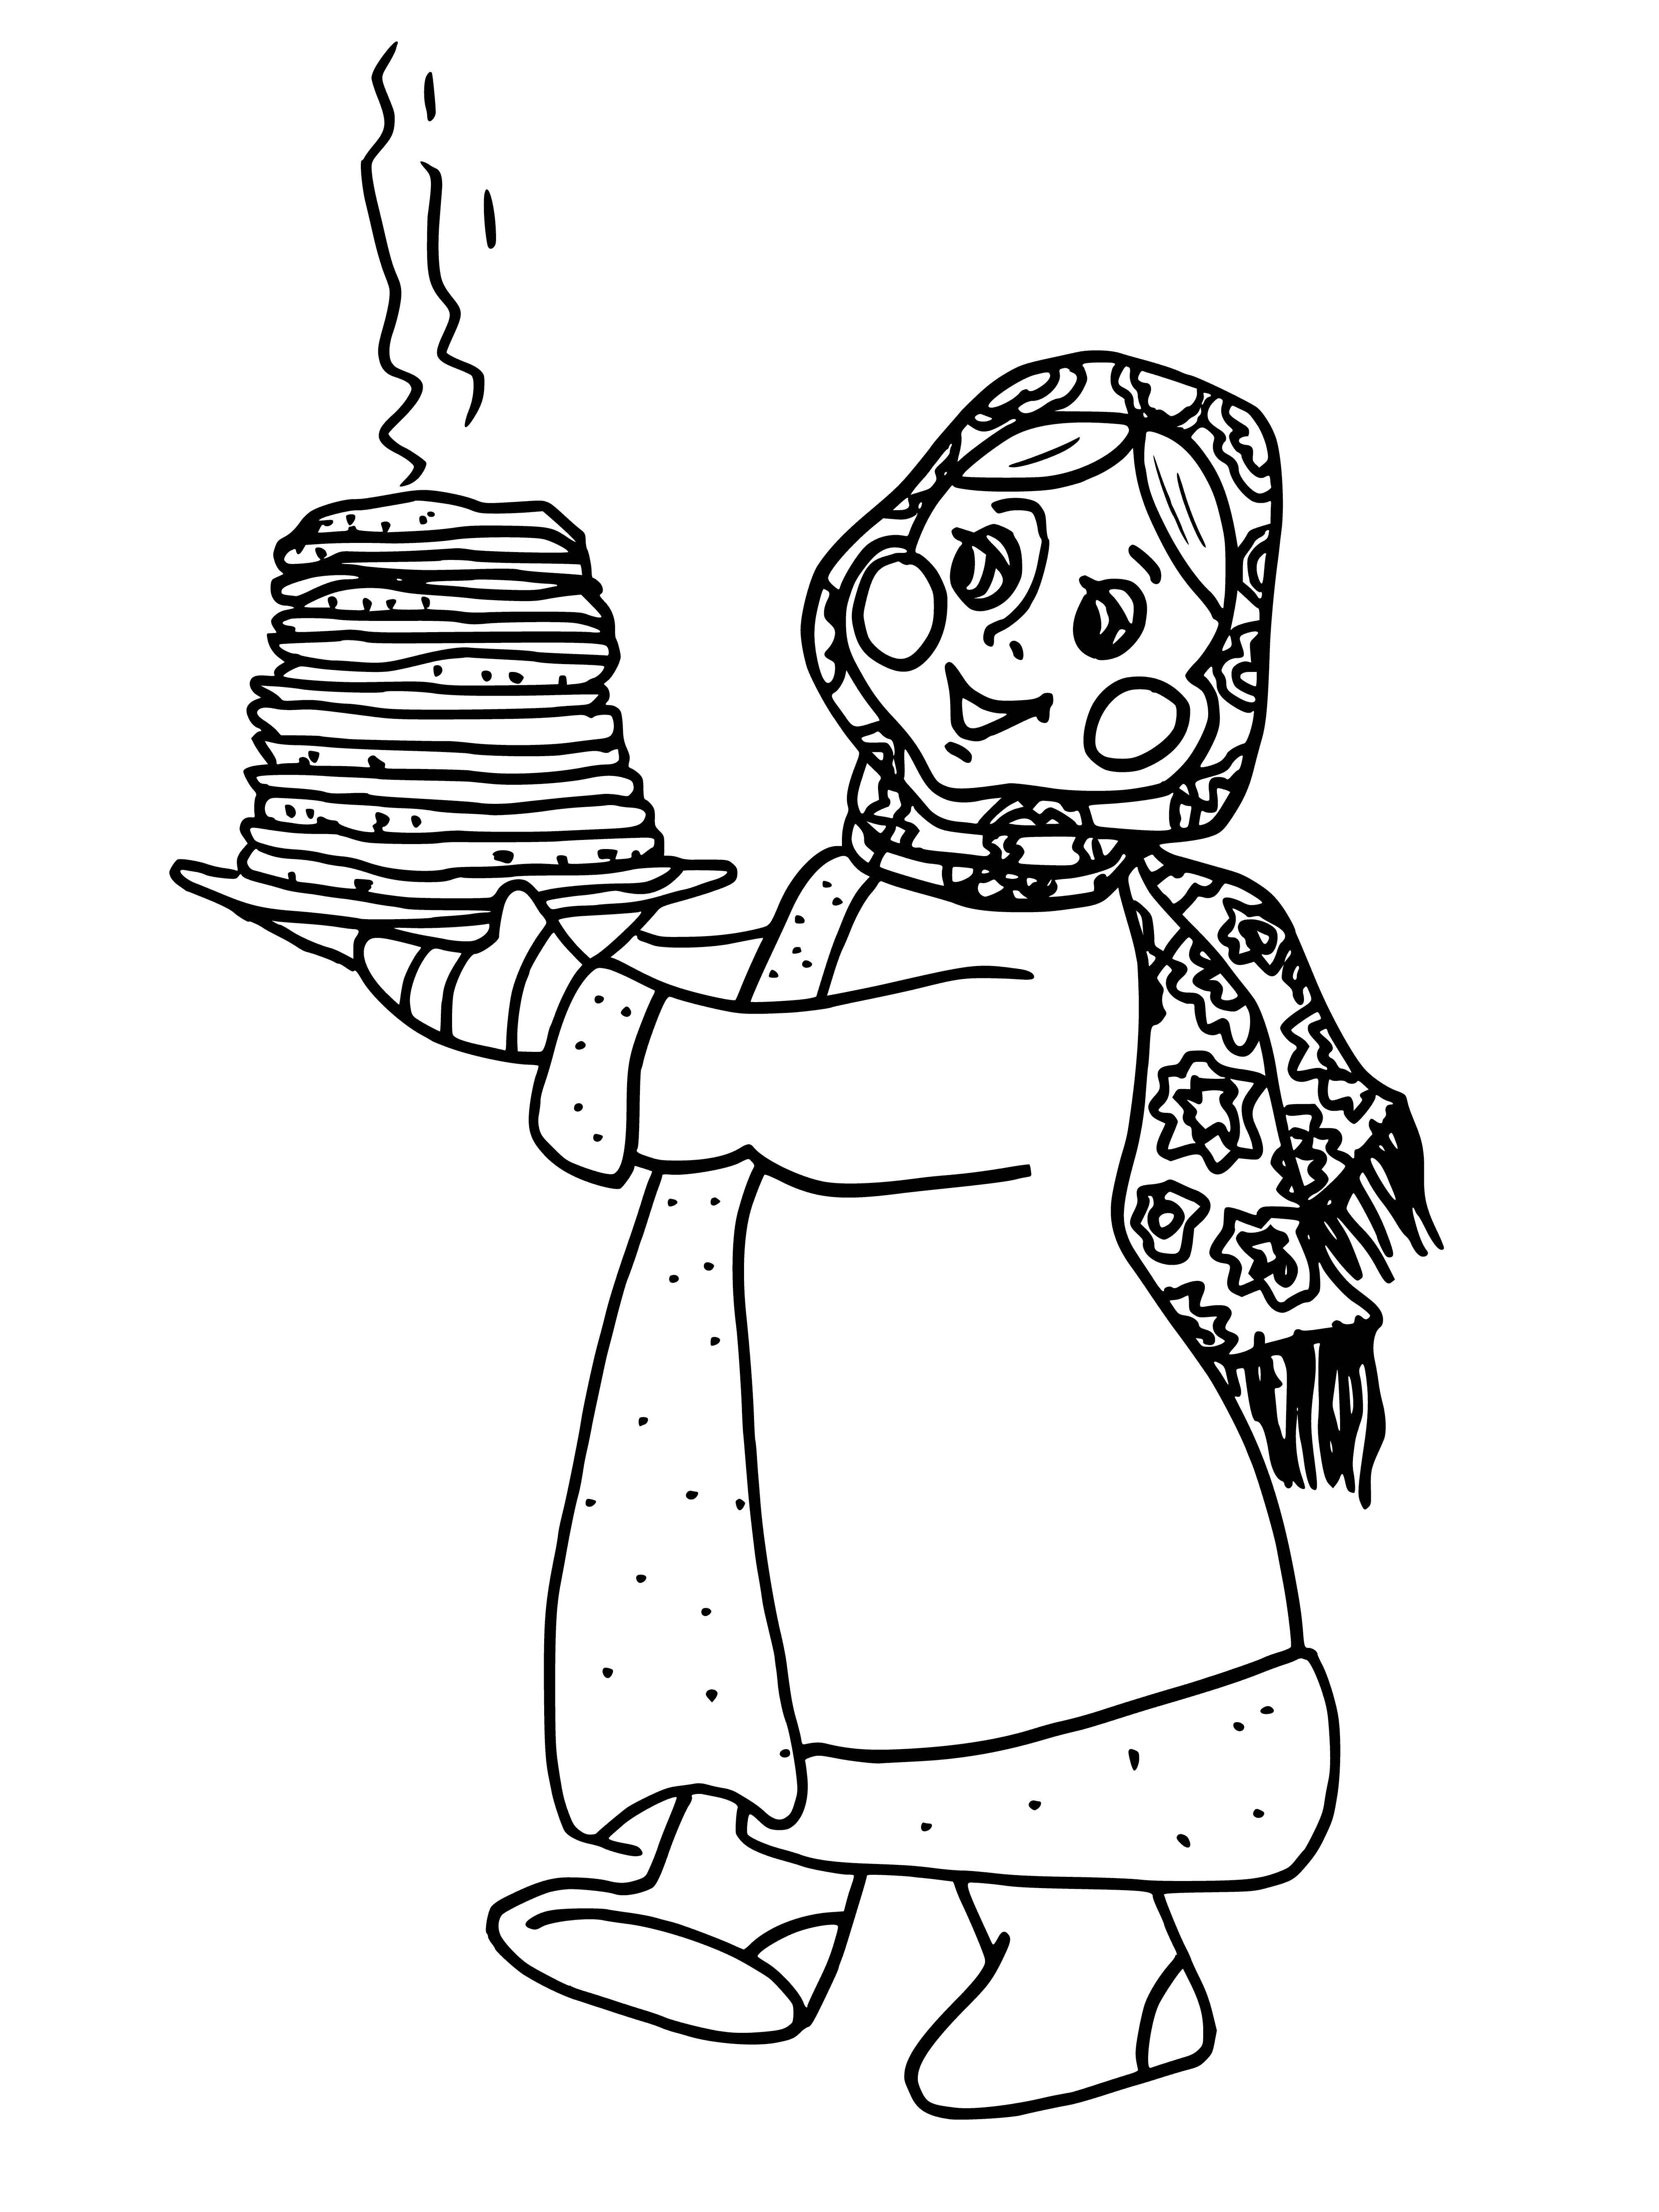 Pancakes for Shrovetide coloring page